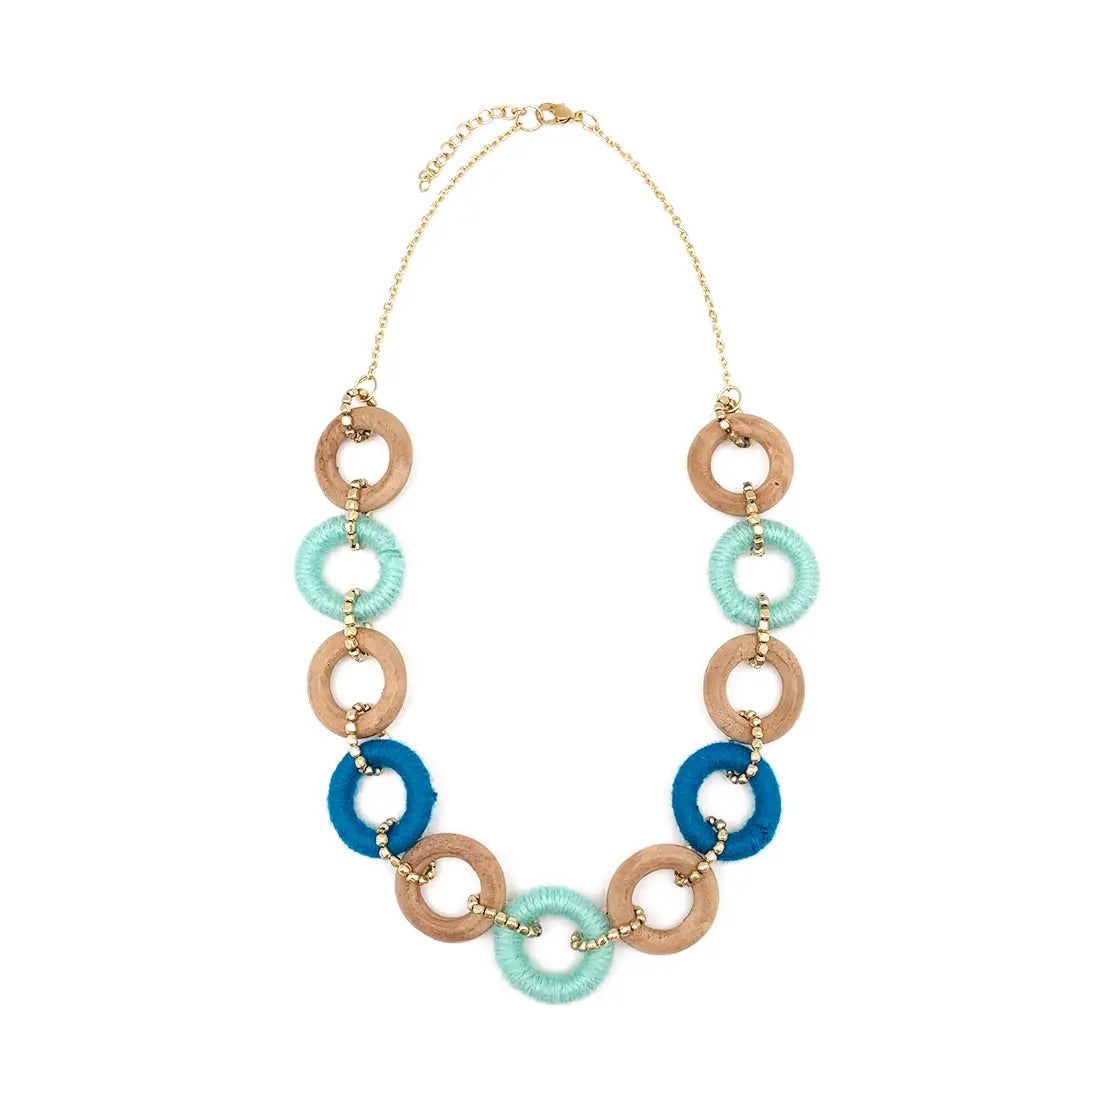 Sachi Bold Whimsy Collection Necklace - Blue and Wood Rings